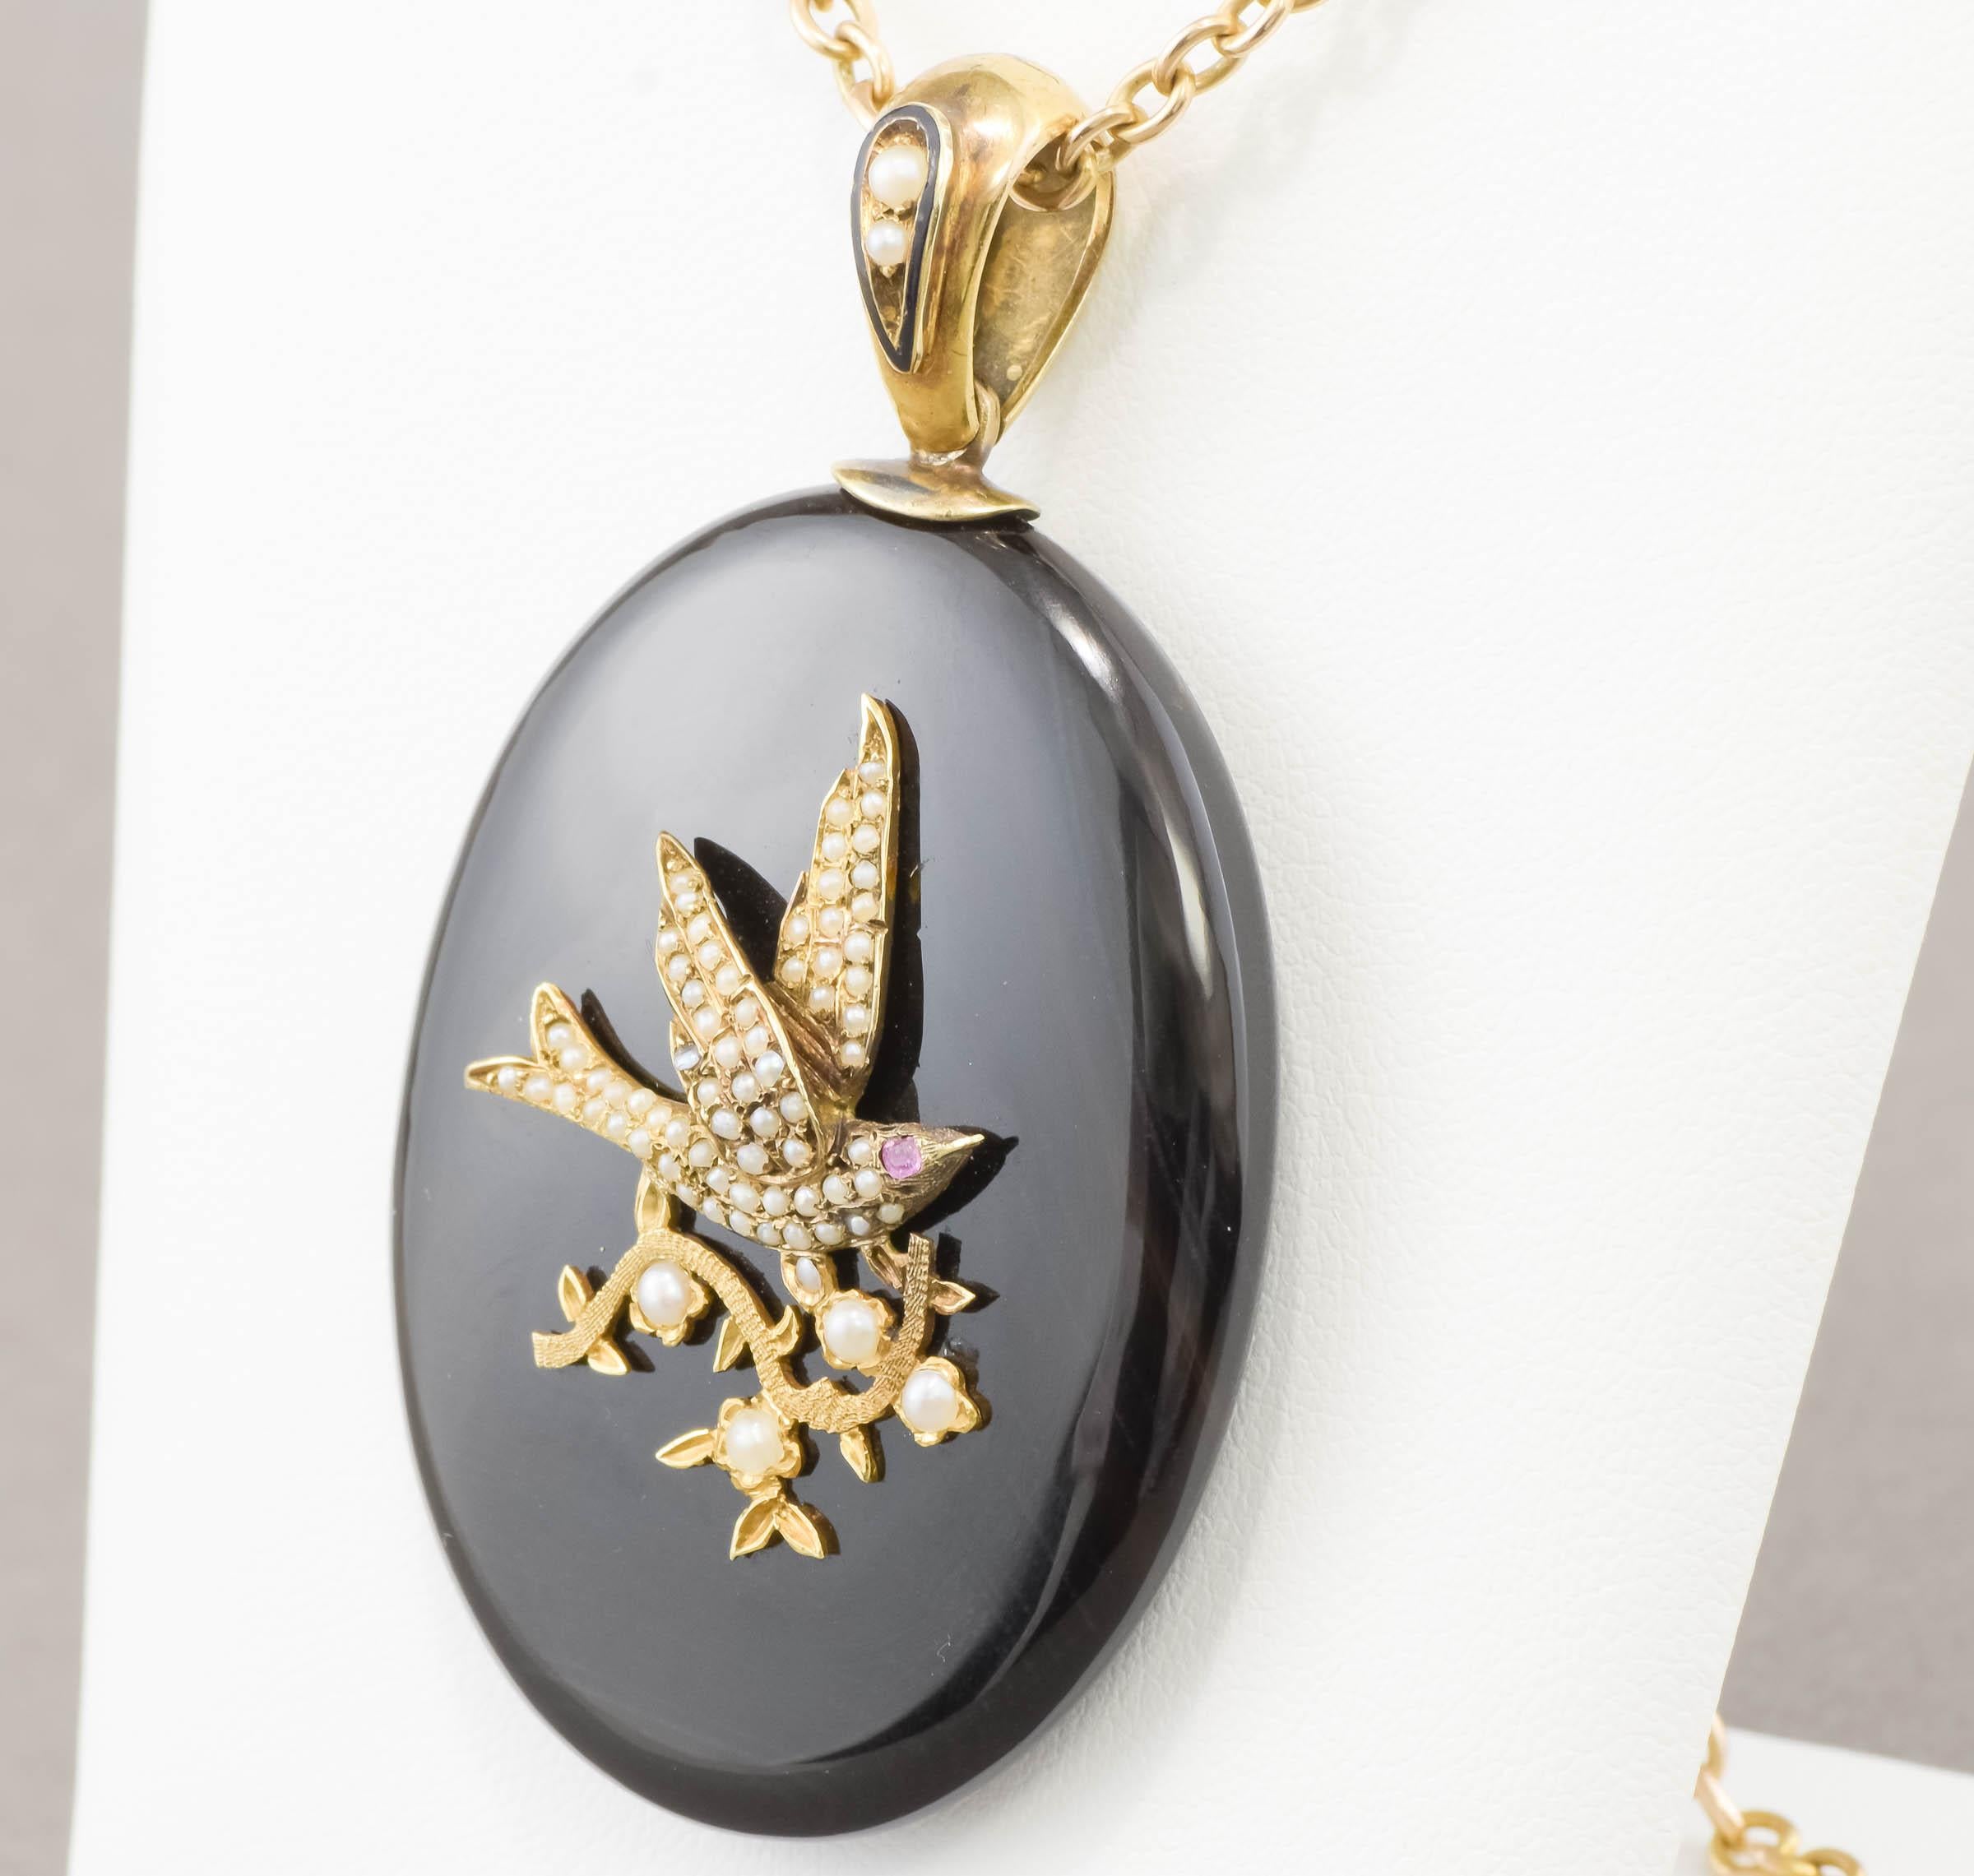 Offered is a very charming Victorian period onyx locket, featuring a pearl set gold Bird (a Swallow) with a foliate design.  The locket retains its original enameled and pearl-set bail, as well as the frame and glazing to the locket back.  This